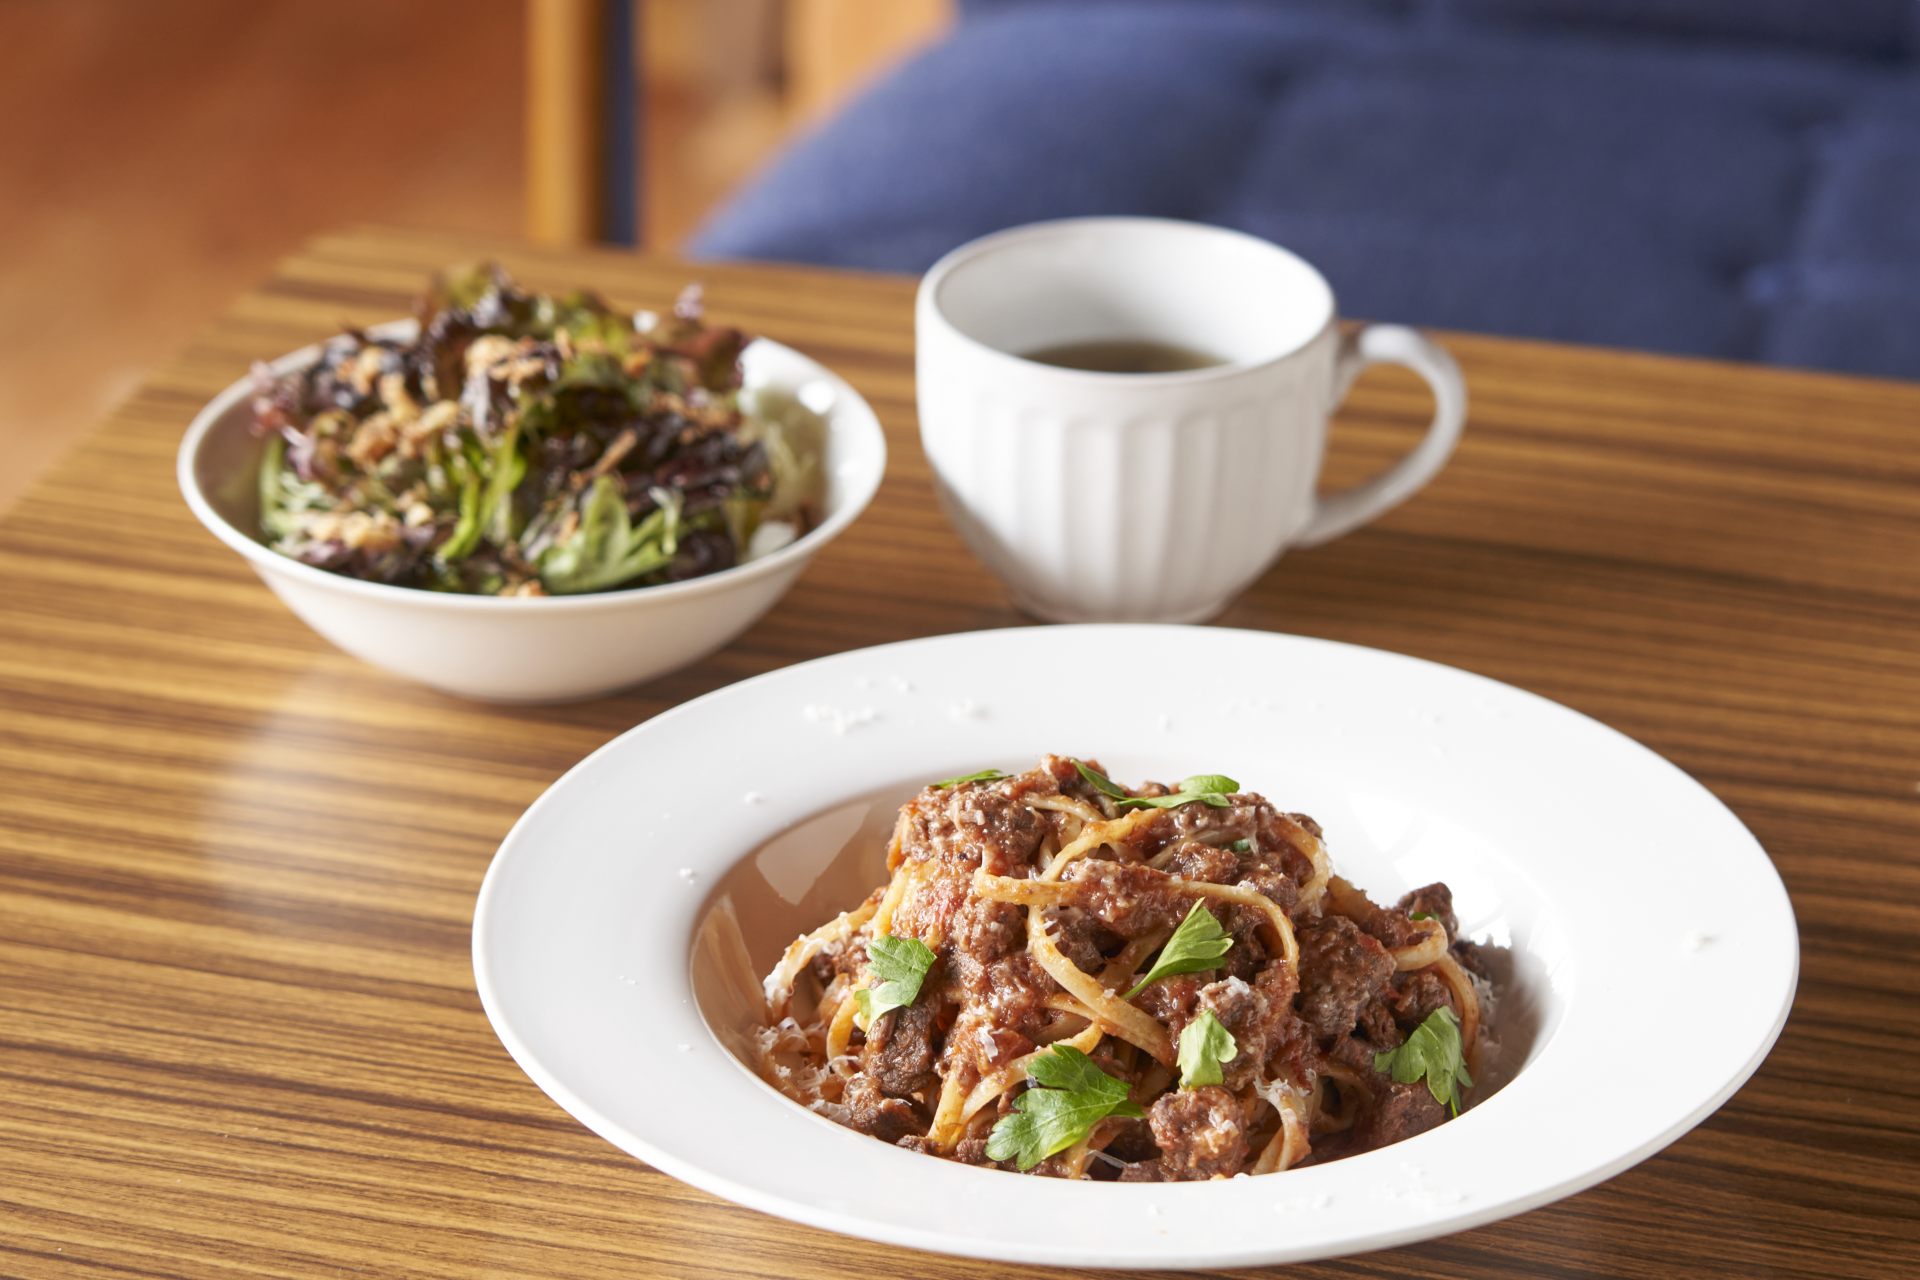 The venison Bolognese set features locally sourced wild game.